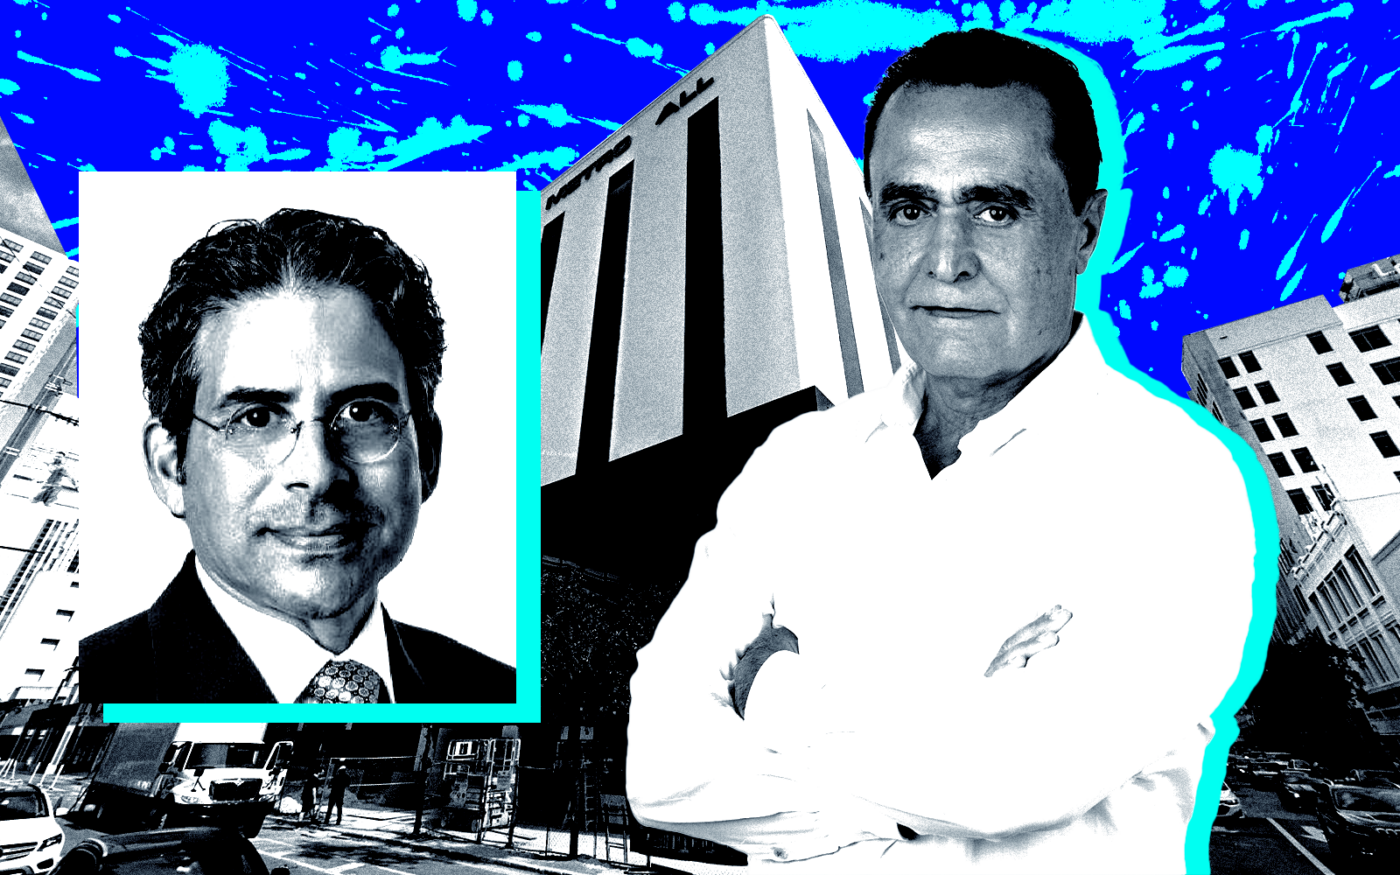 Elysee JV buys Yair Levy’s downtown Miami building for $28M